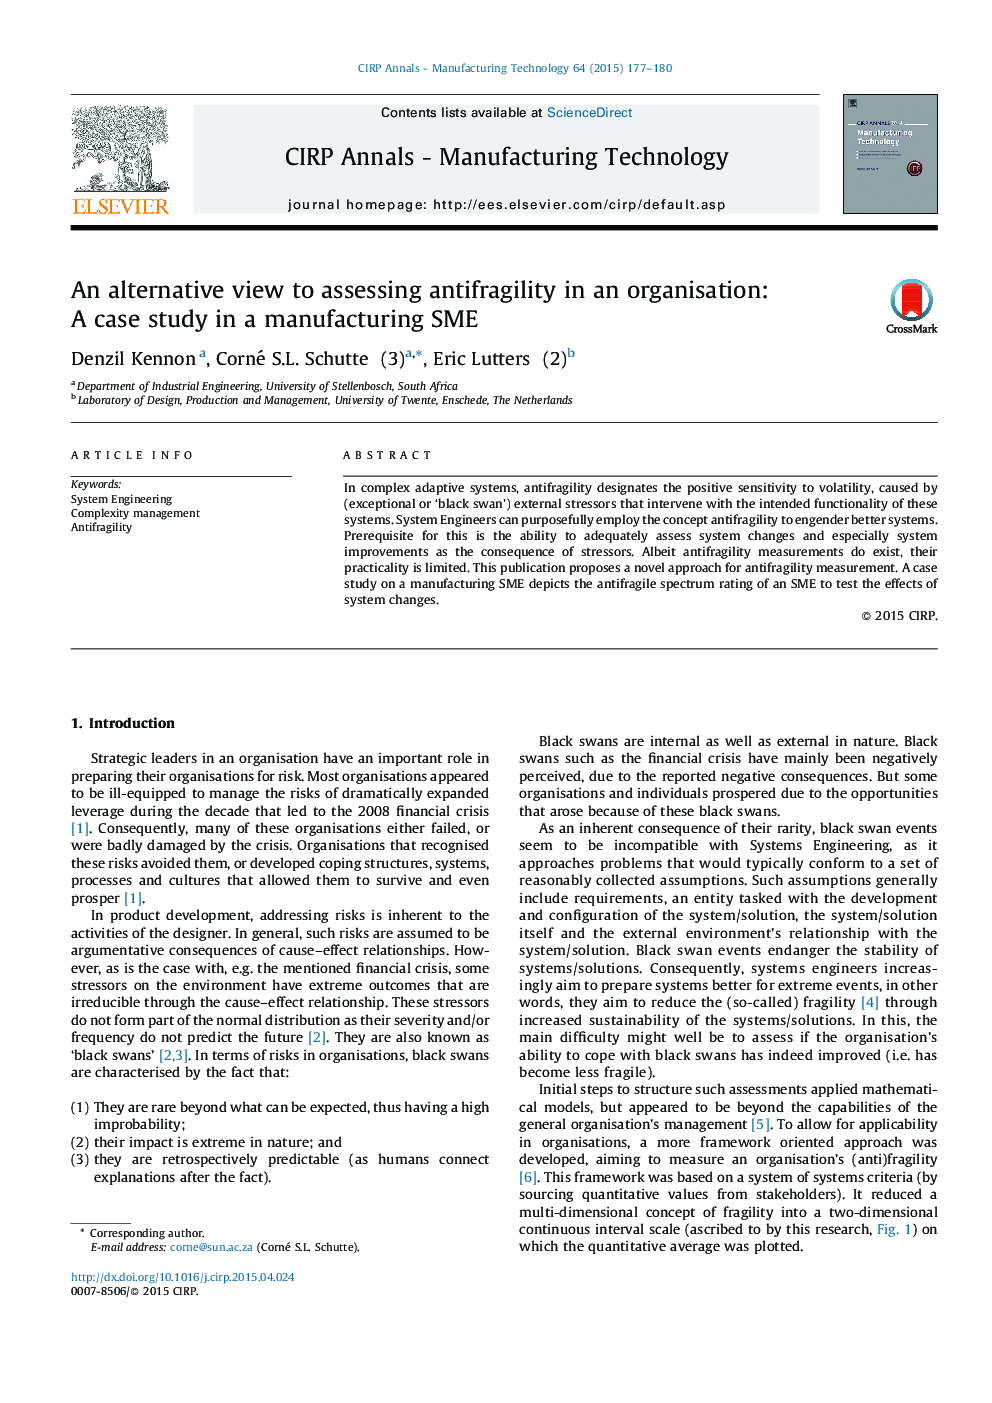 An alternative view to assessing antifragility in an organisation: A case study in a manufacturing SME